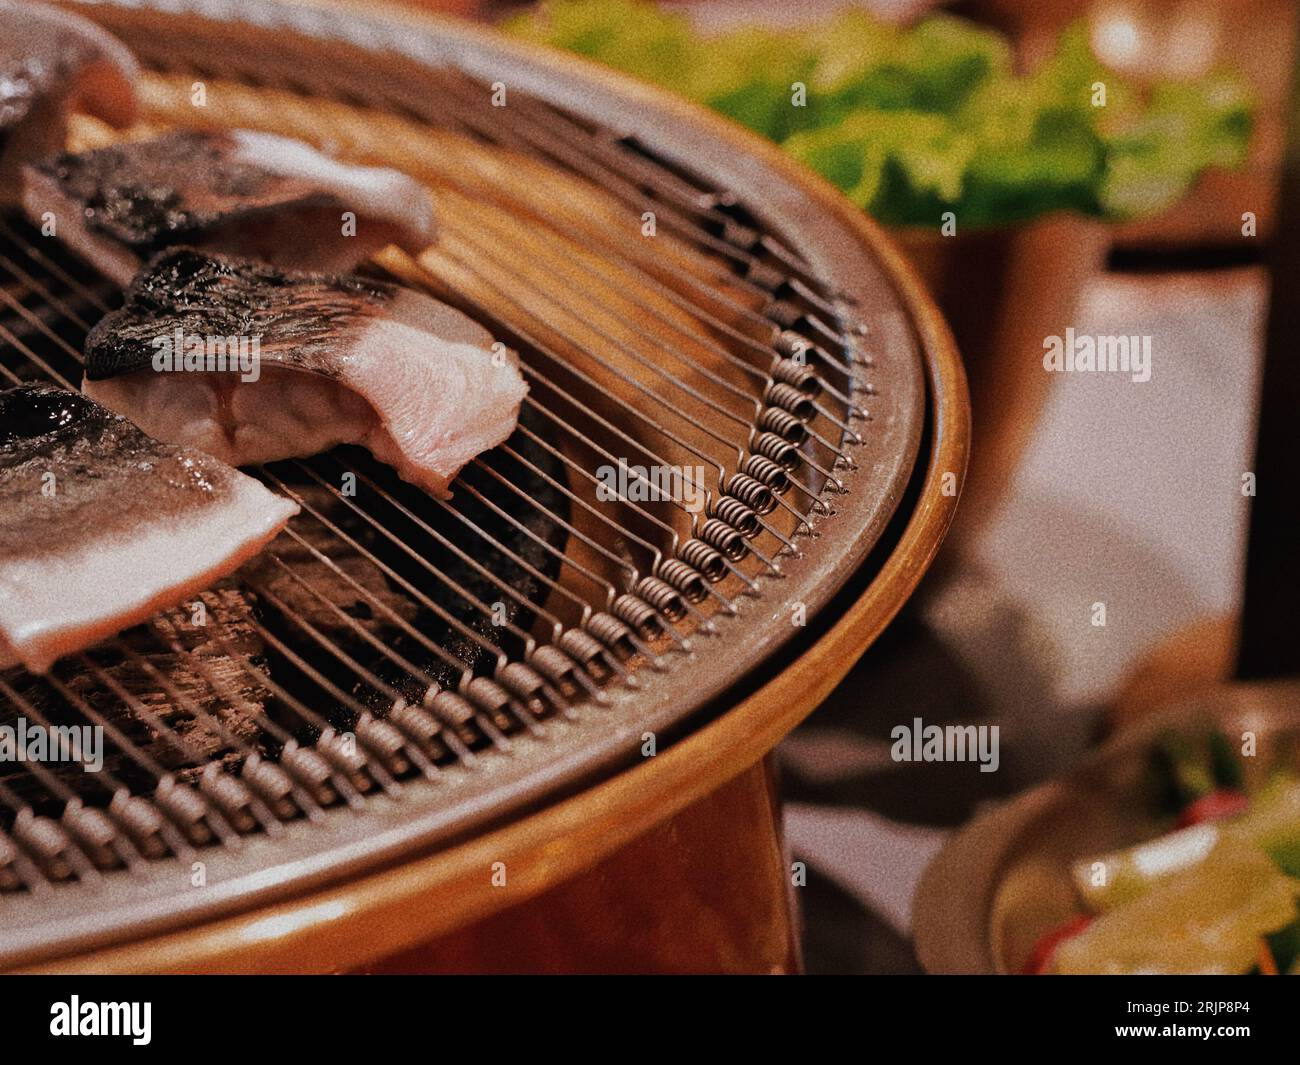 A barbecue grill full of sizzling meats with a blurred background Stock Photo